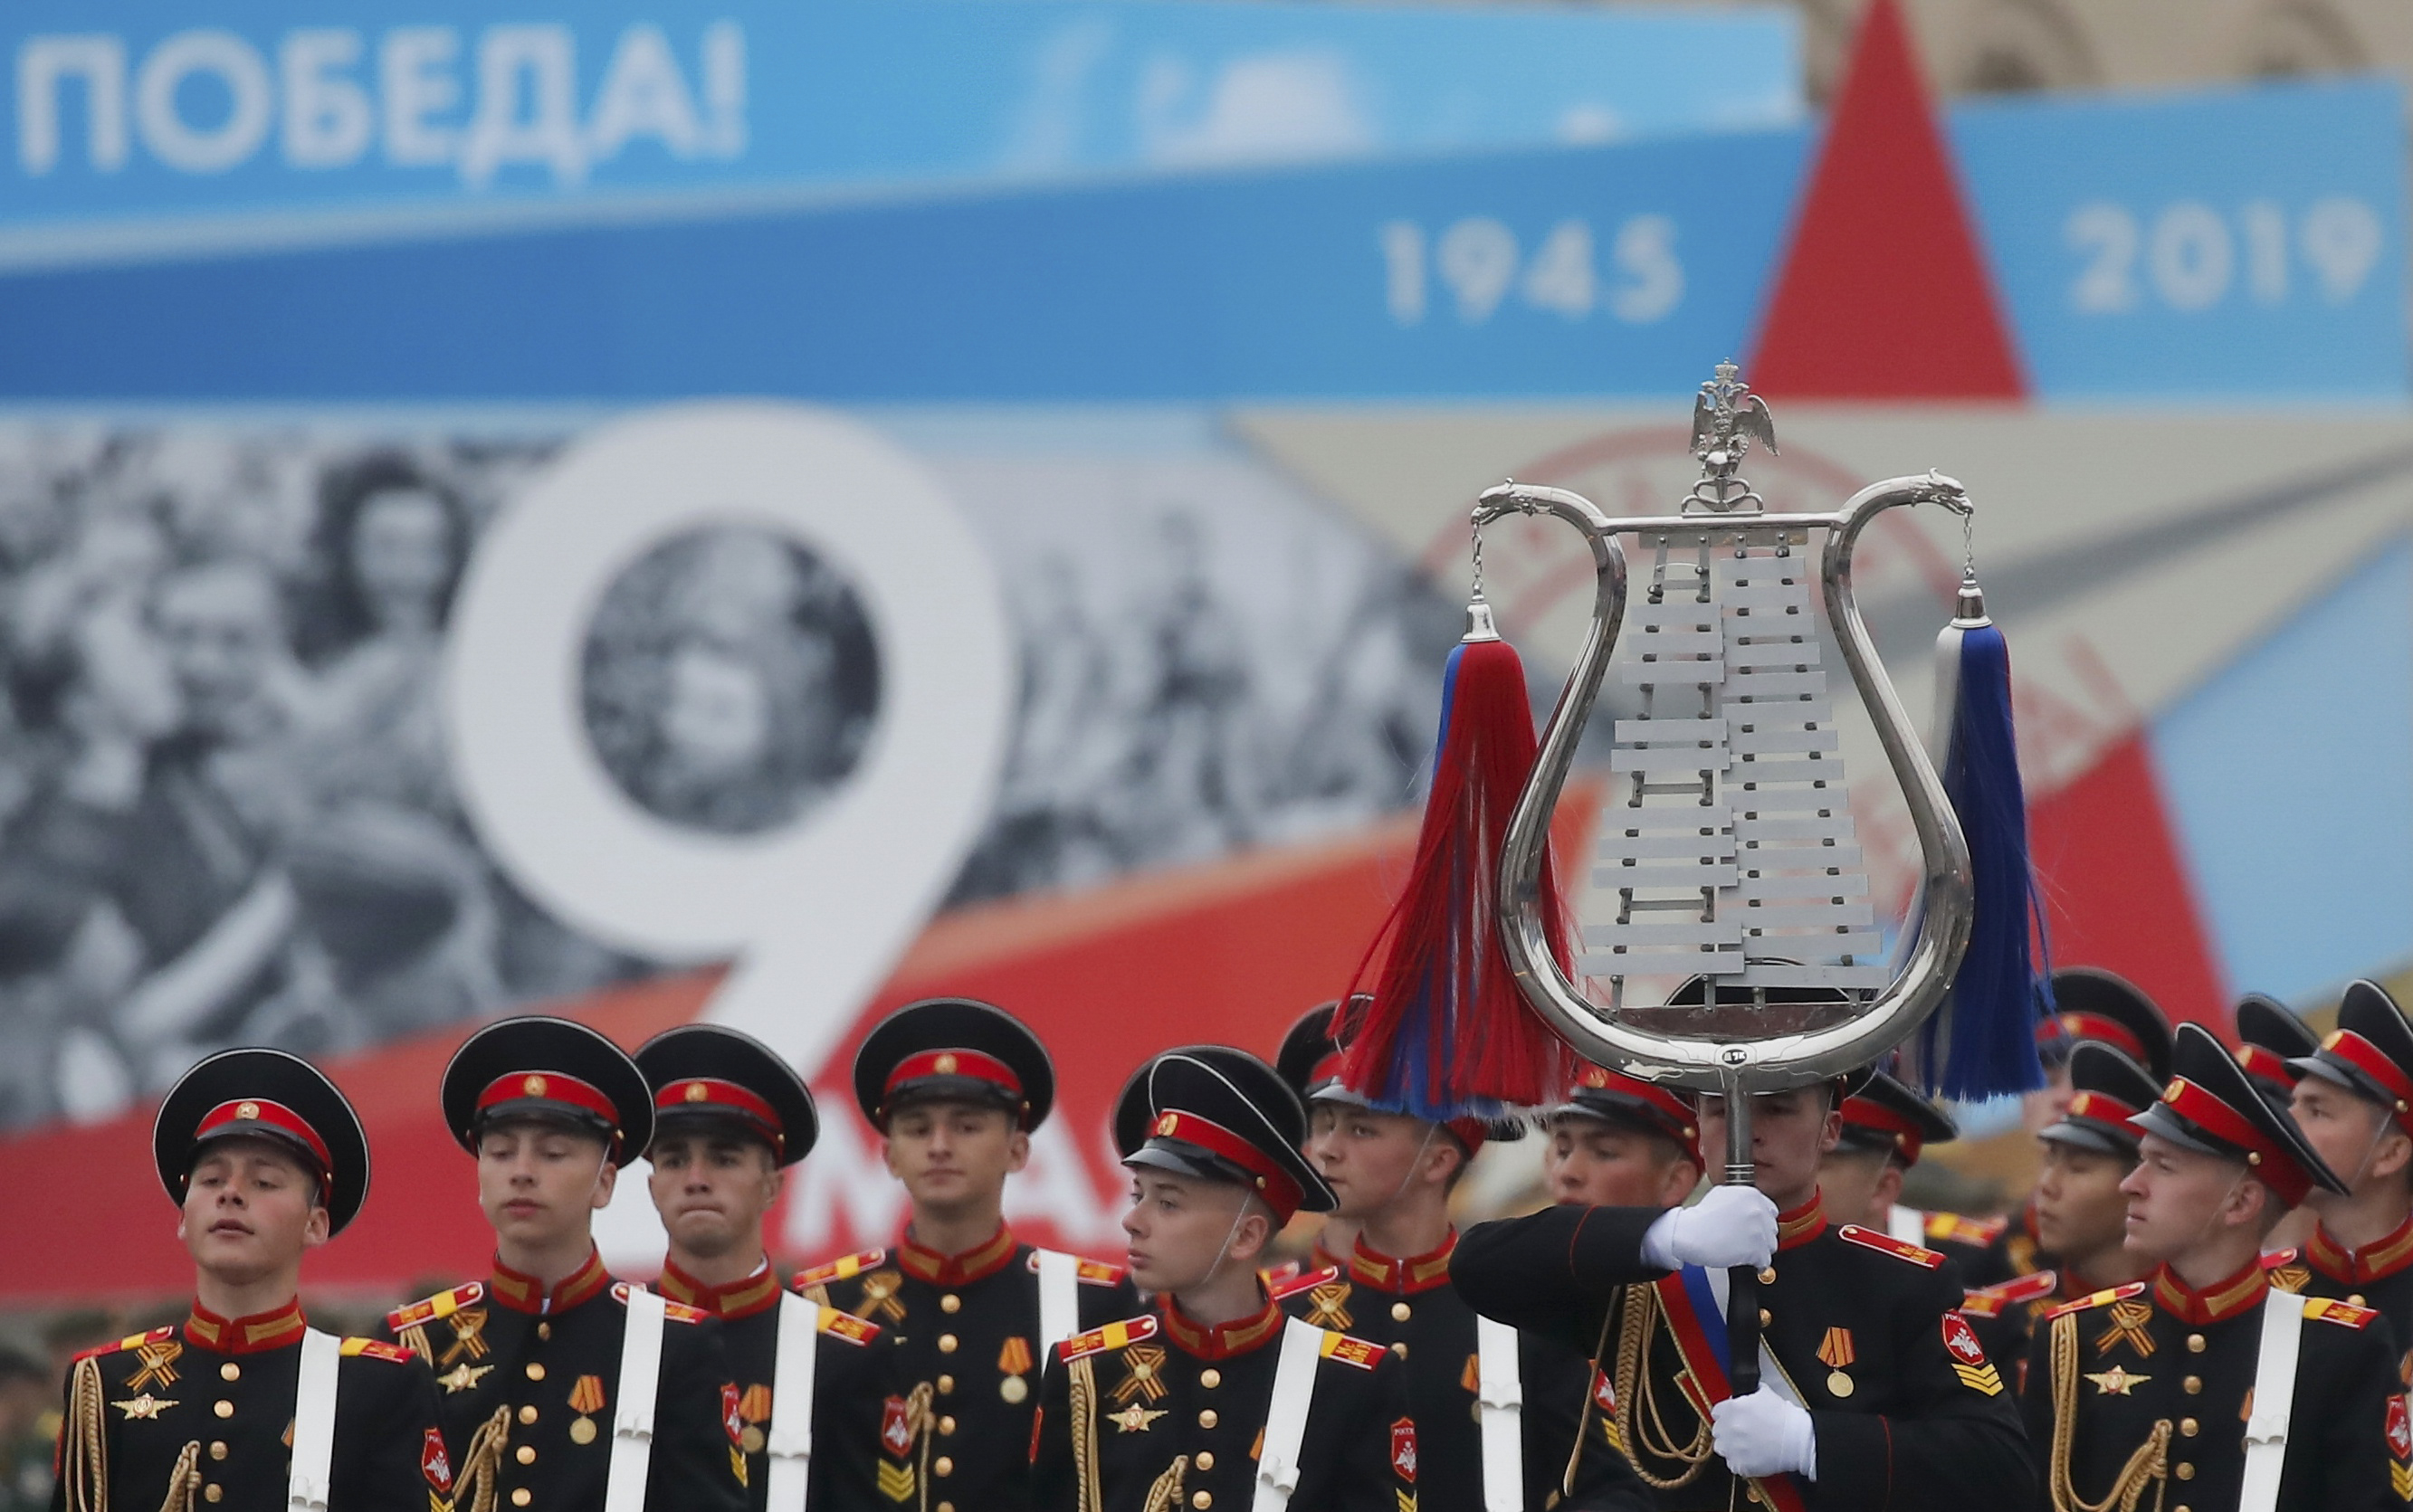 2019-05-09T090848Z_126717808_UP1EF590PEO56_RTRMADP_3_WW2-ANNIVERSARY-RUSSIA-PARADE